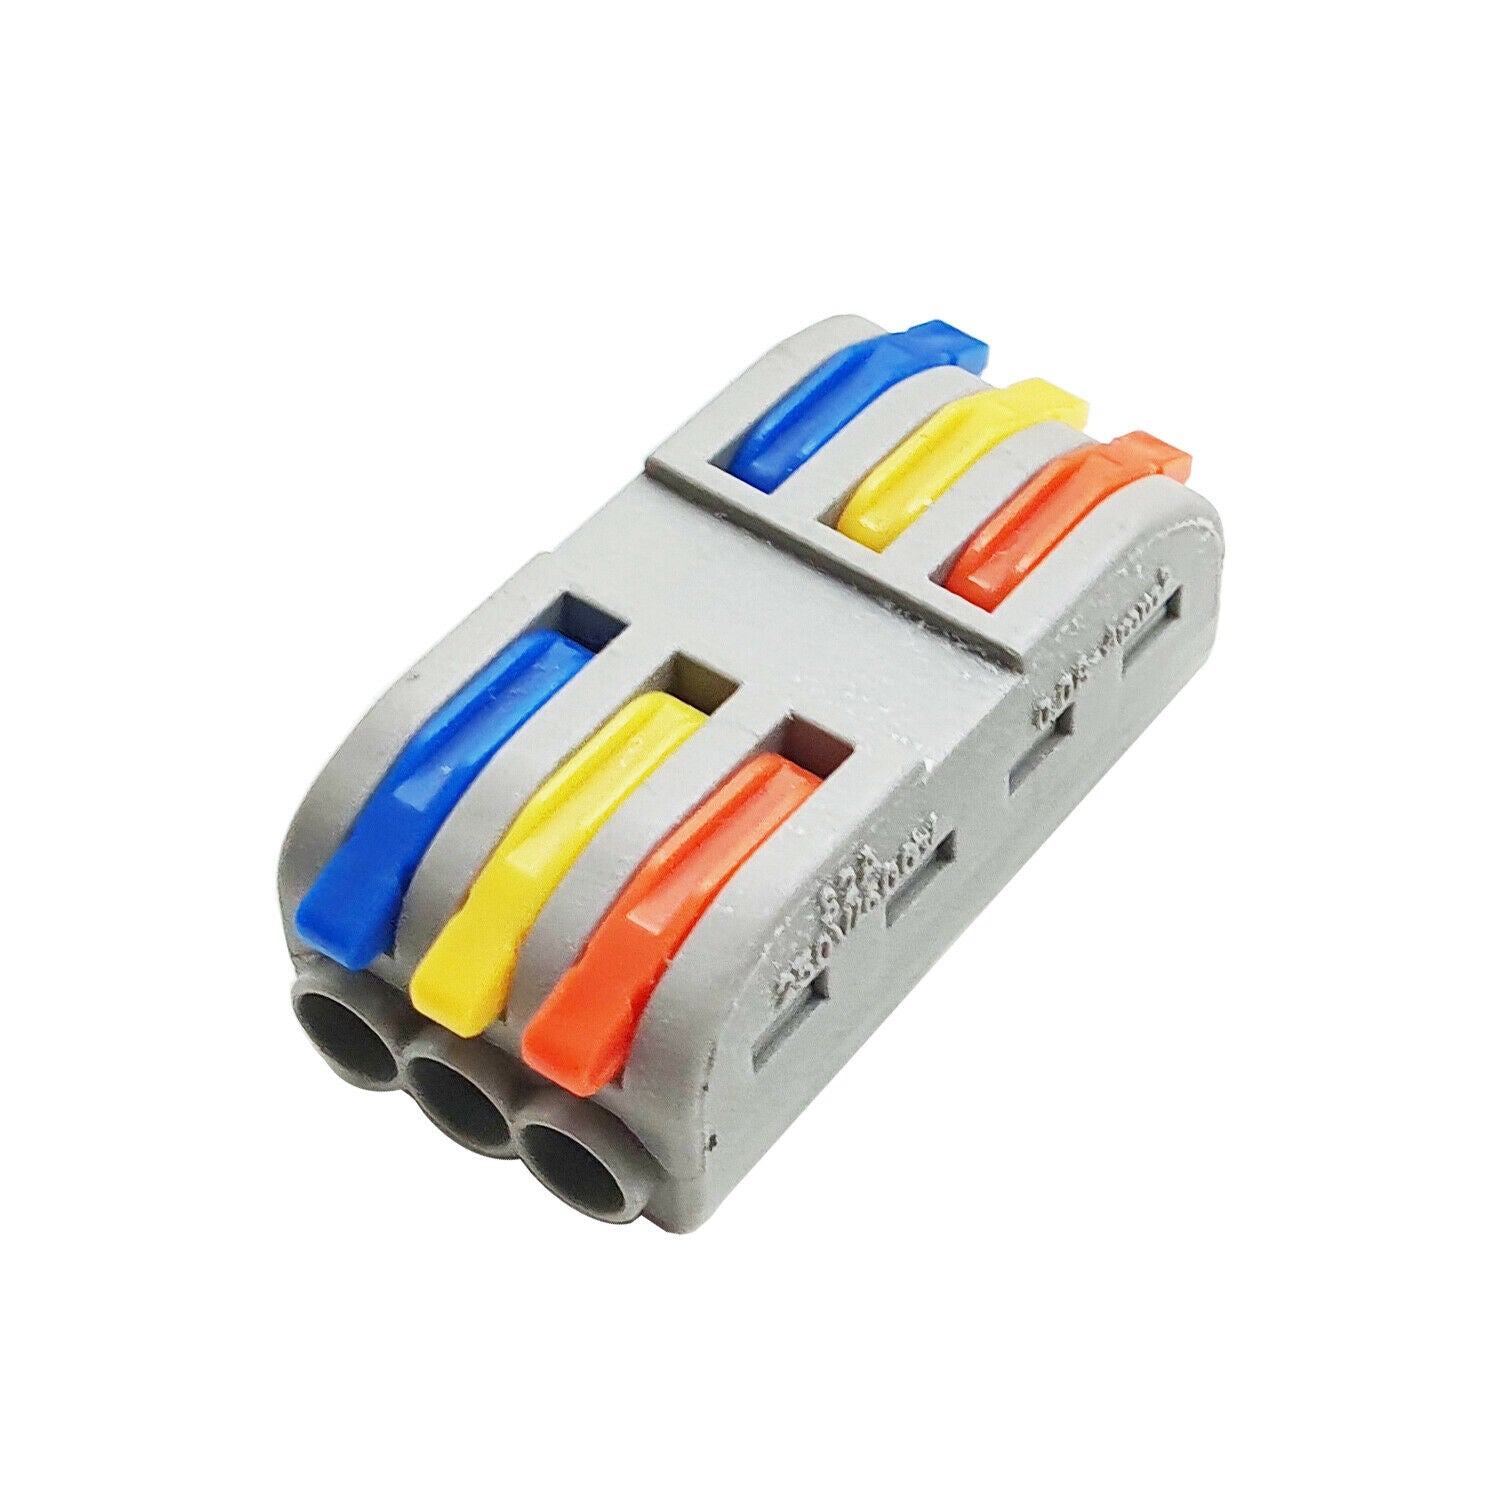 3 Way Electrical Connectors Wire Block Clamp Clips Fast Cable Reusable Lever~2038 - LEDSone UK Ltd